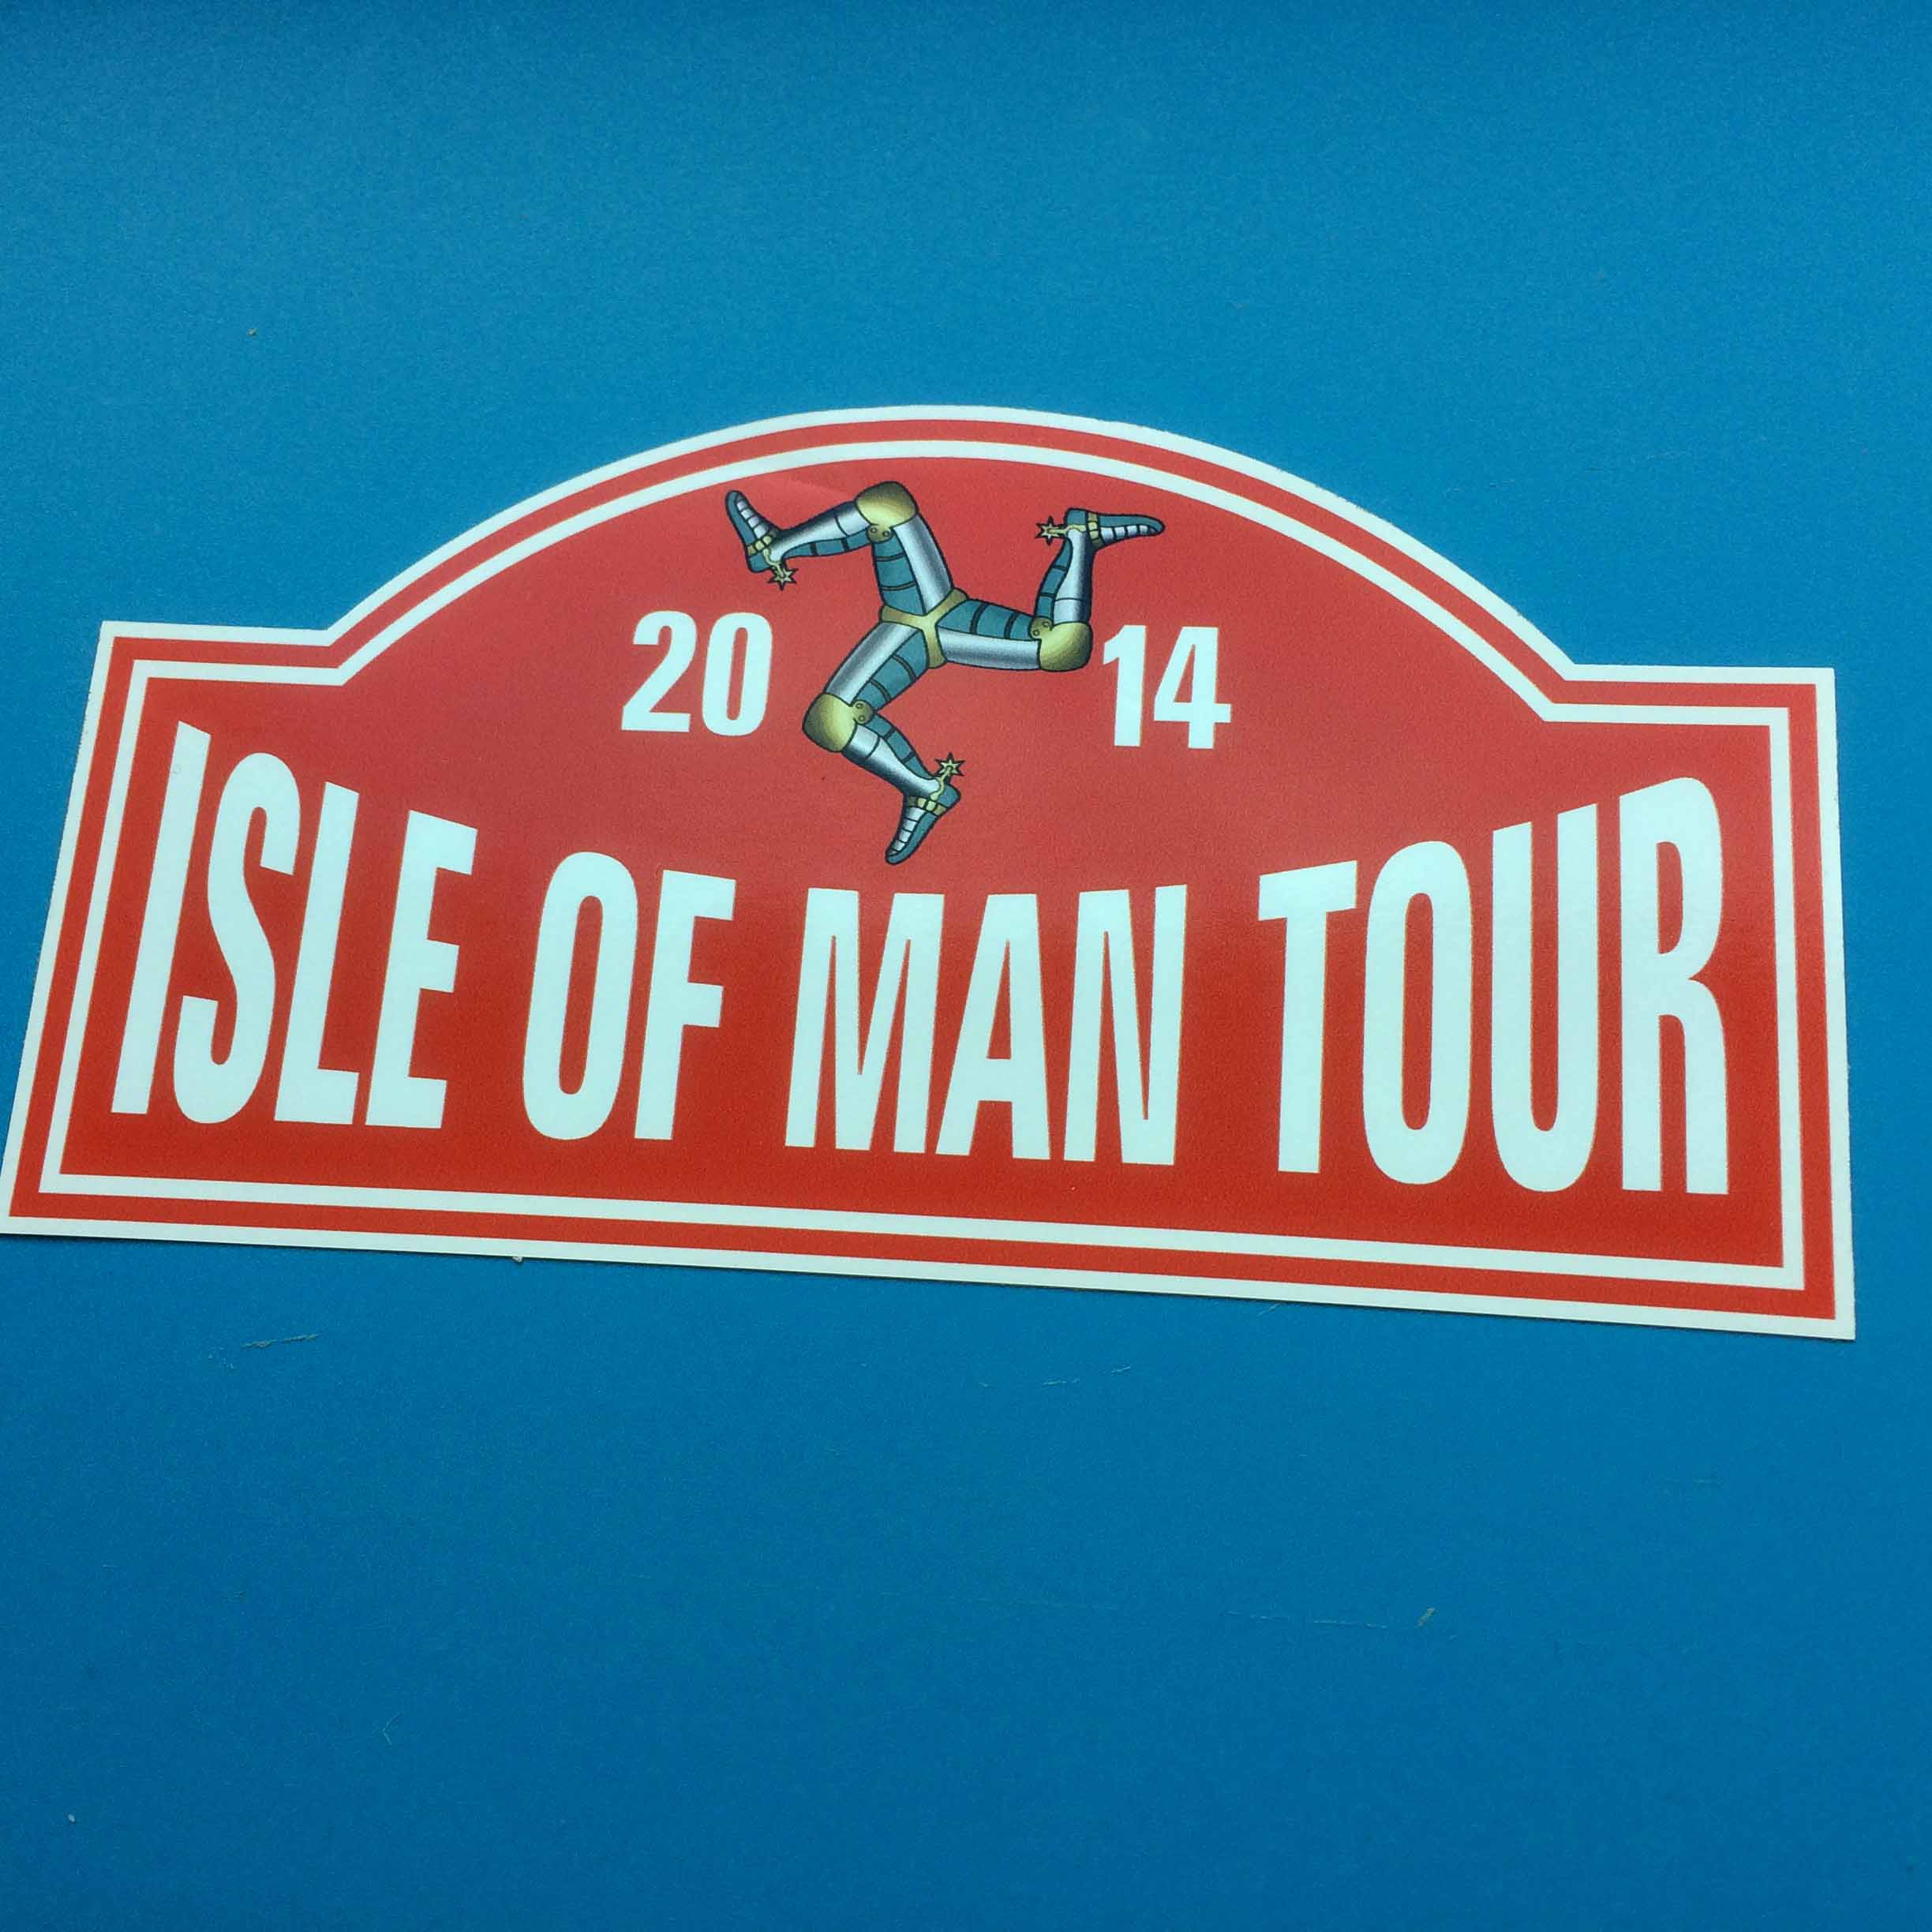 Isle Of Man Tour 2014 in bold white lettering on a red background. Above is the Isle Of Man triskelion.